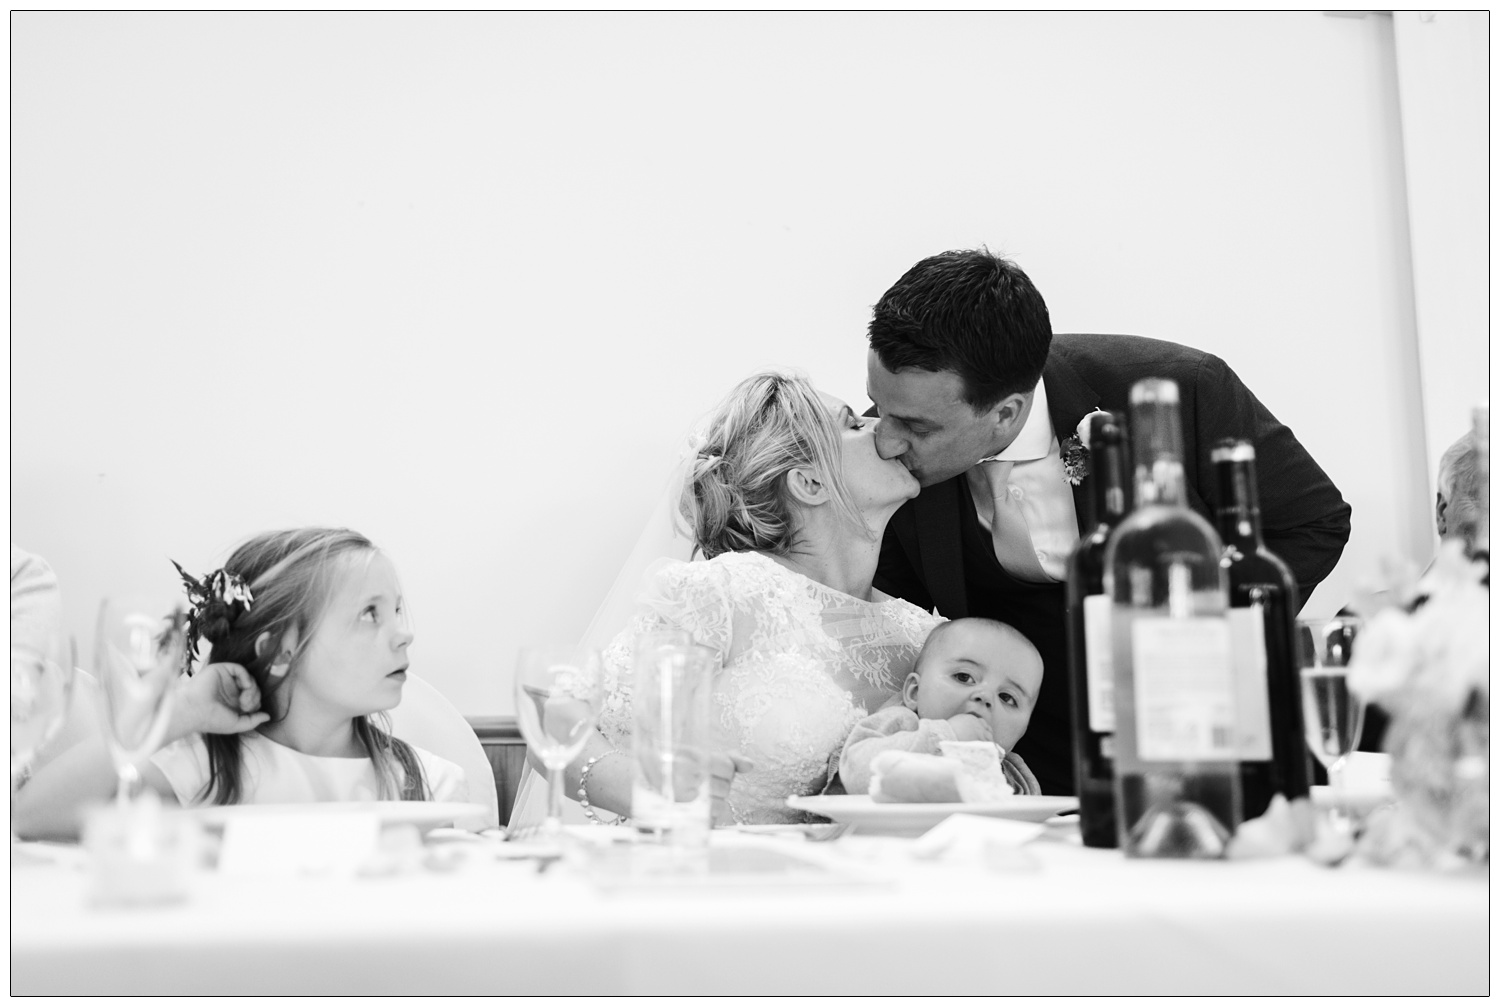 bride and groom kissing while children watch at table.